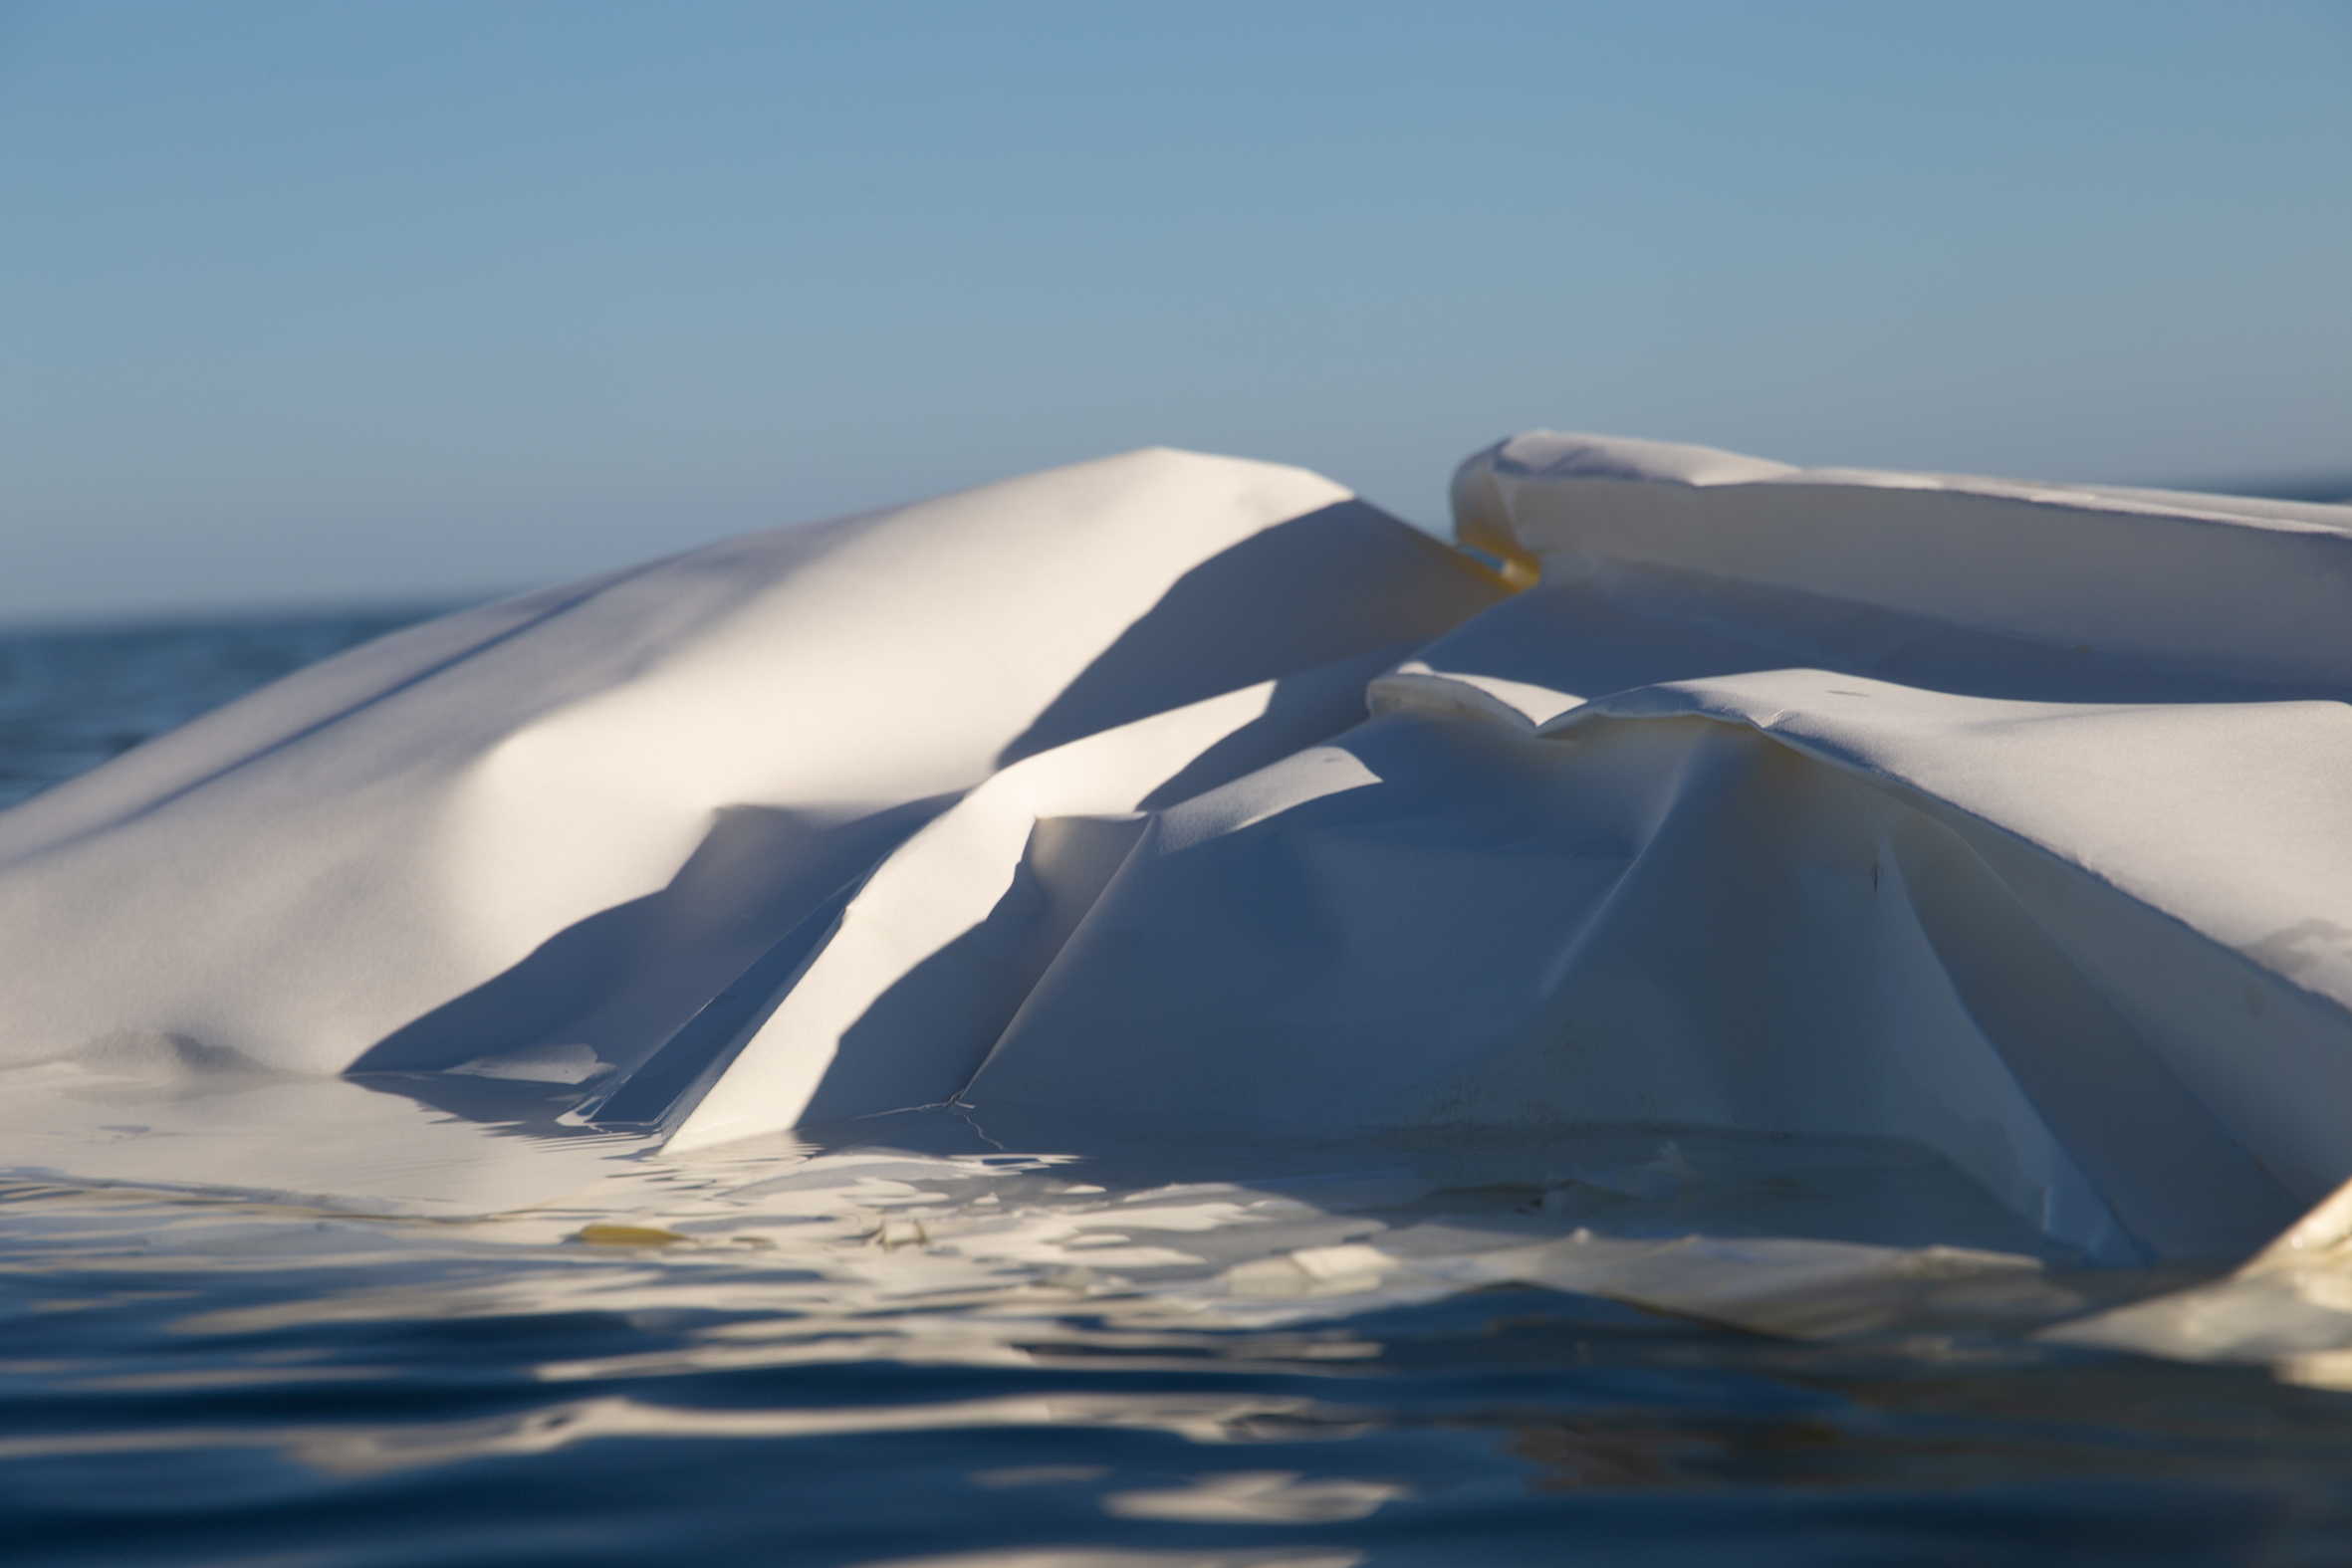 A photograph reminiscent of icebergs, but they are folded paper